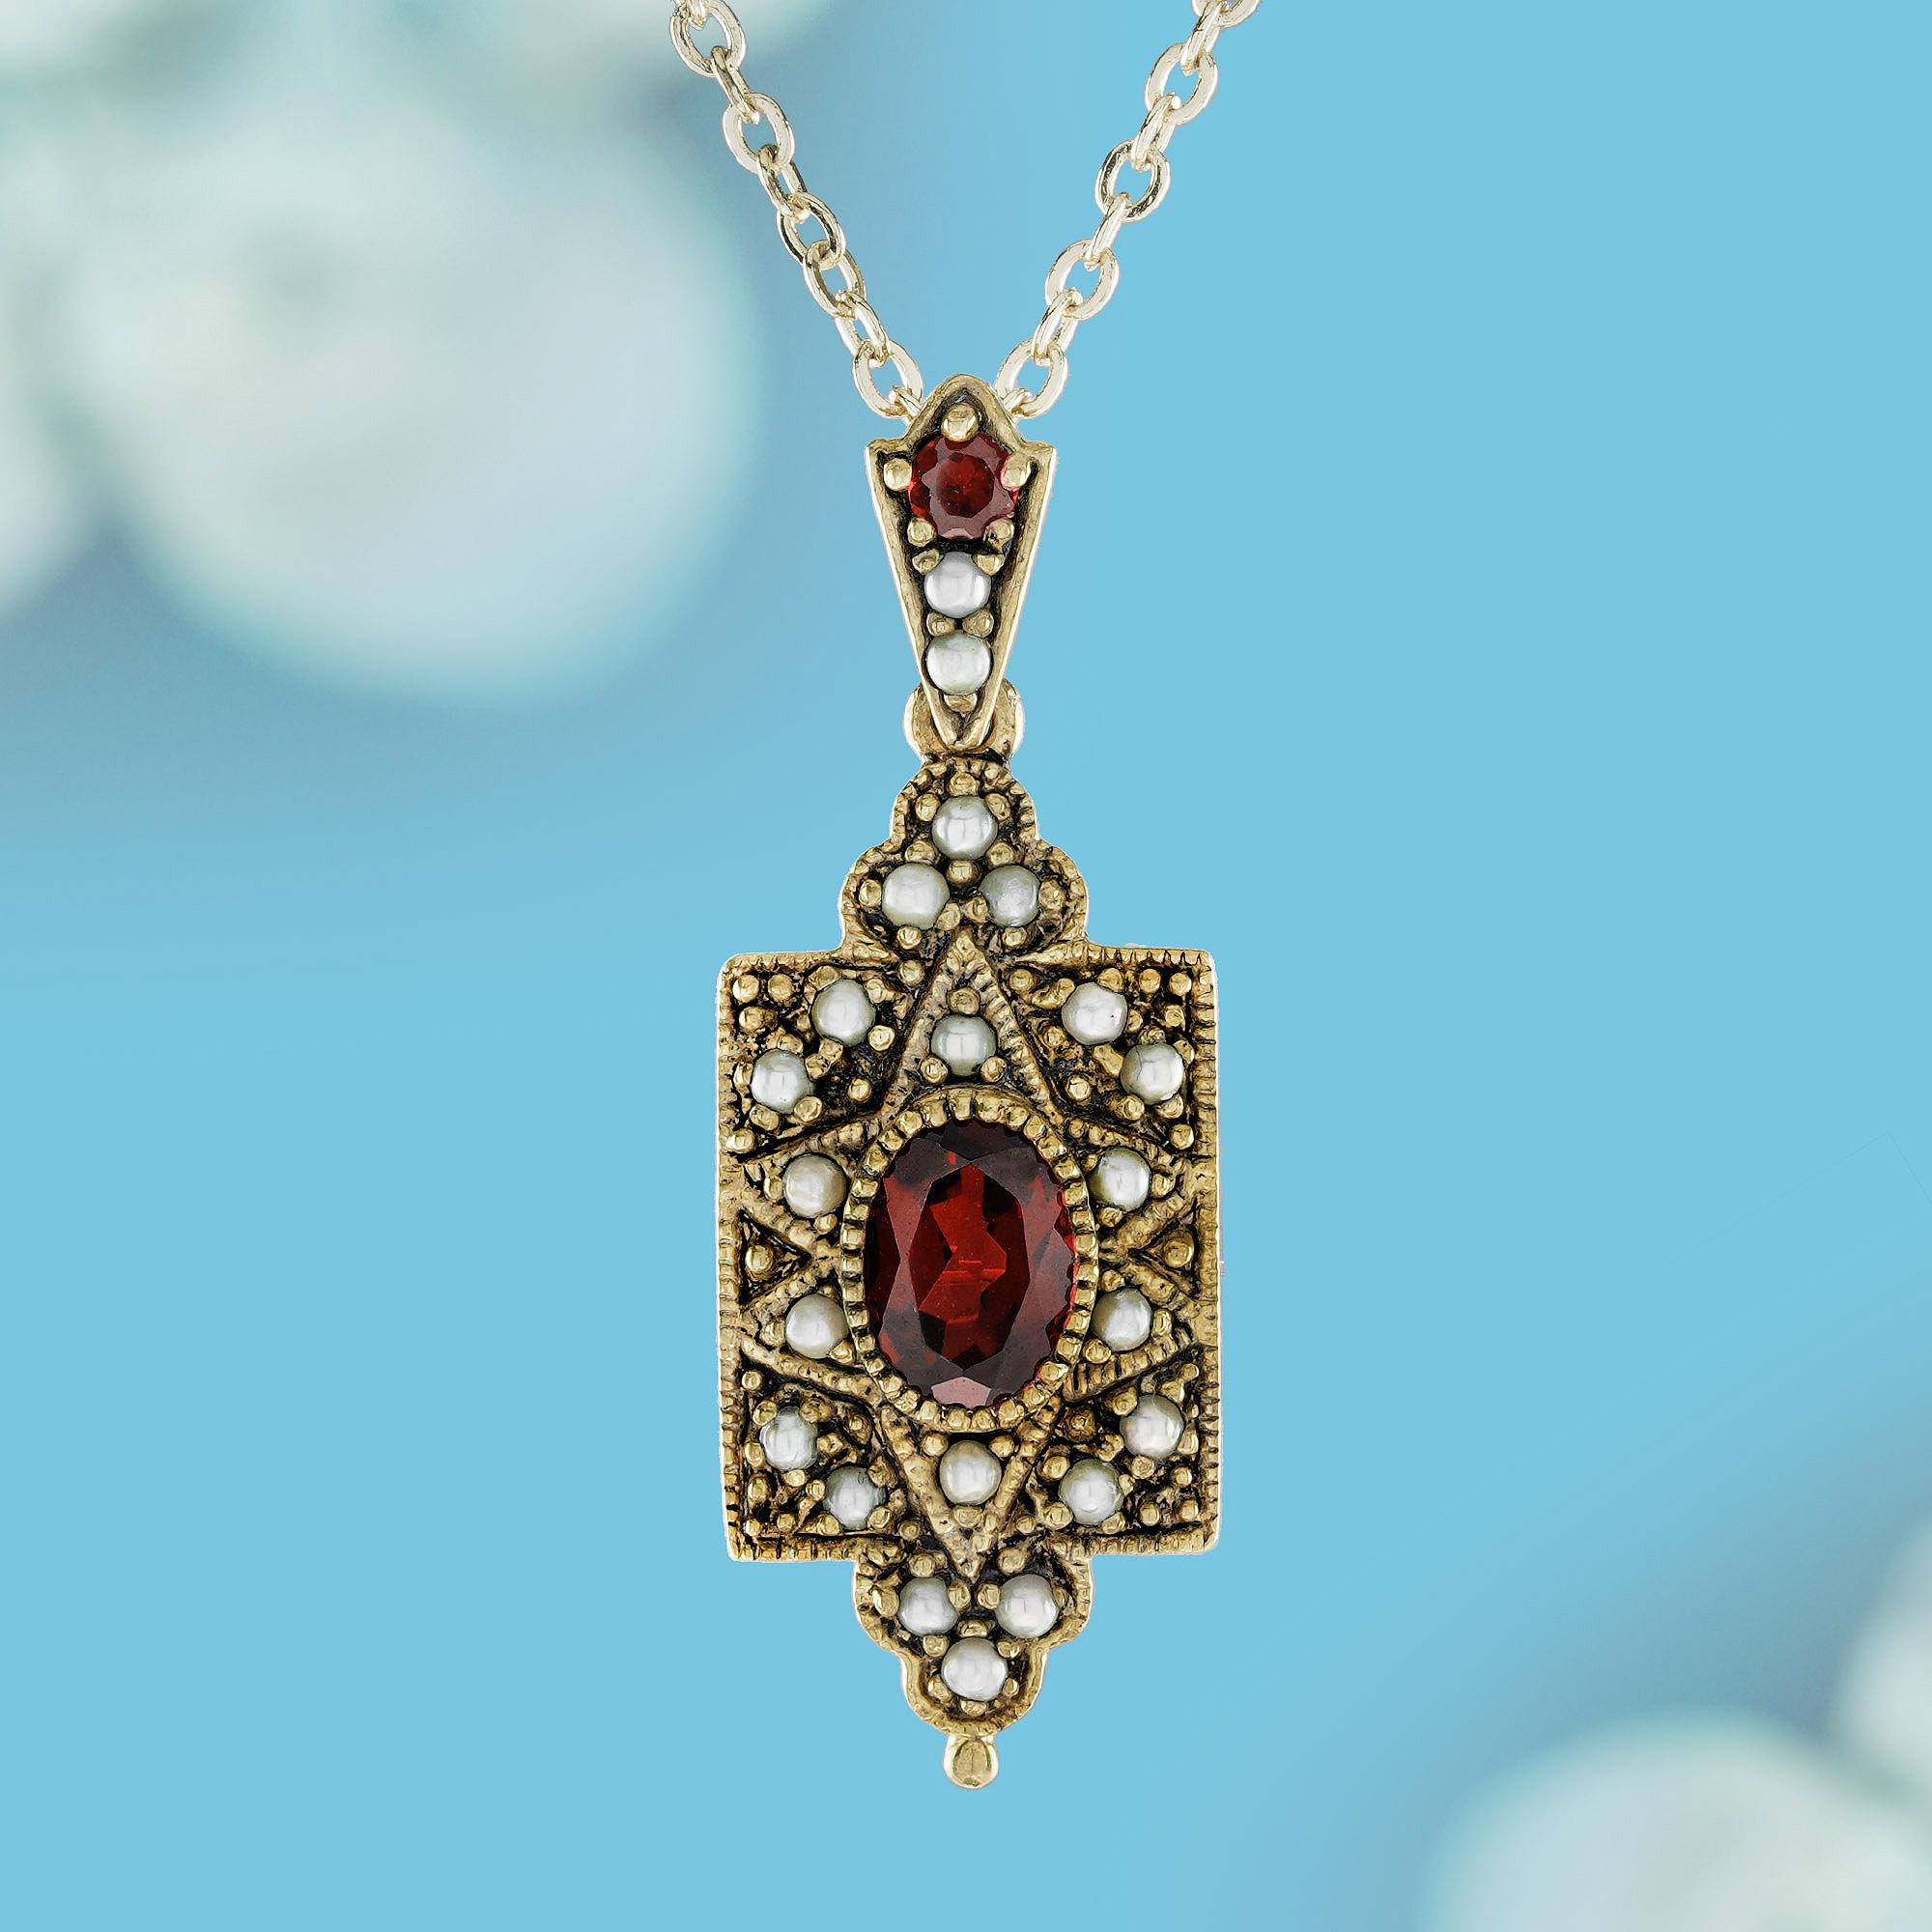 This pendant flaunts a square shape adorned with clusters at both ends, accentuating a round deep red garnet nestled in the center. Enhanced by pearls scattered throughout, it adds a touch of elegance and color to the intricate yellow gold milgrain